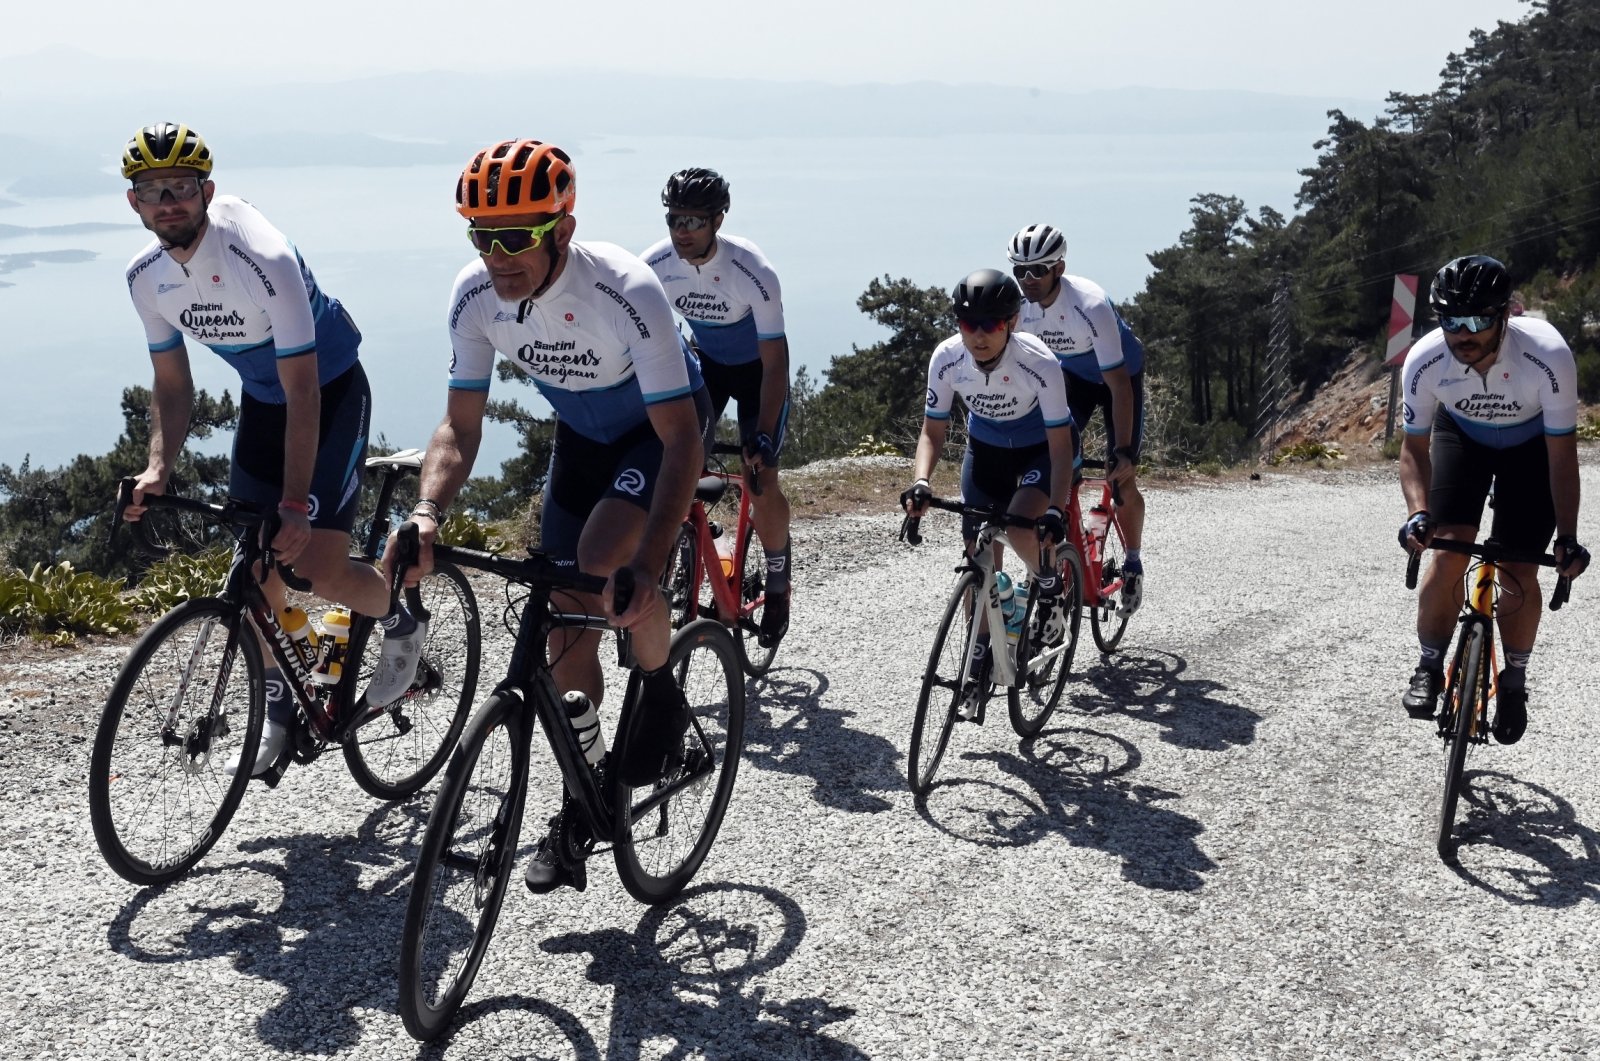 A group of cyclists takes part in a promotional tour for the Santini Queens of the Aegean Boostrace, March 26, 2022, Marmaris, Turkey. (Photo courtesy Boostrace)